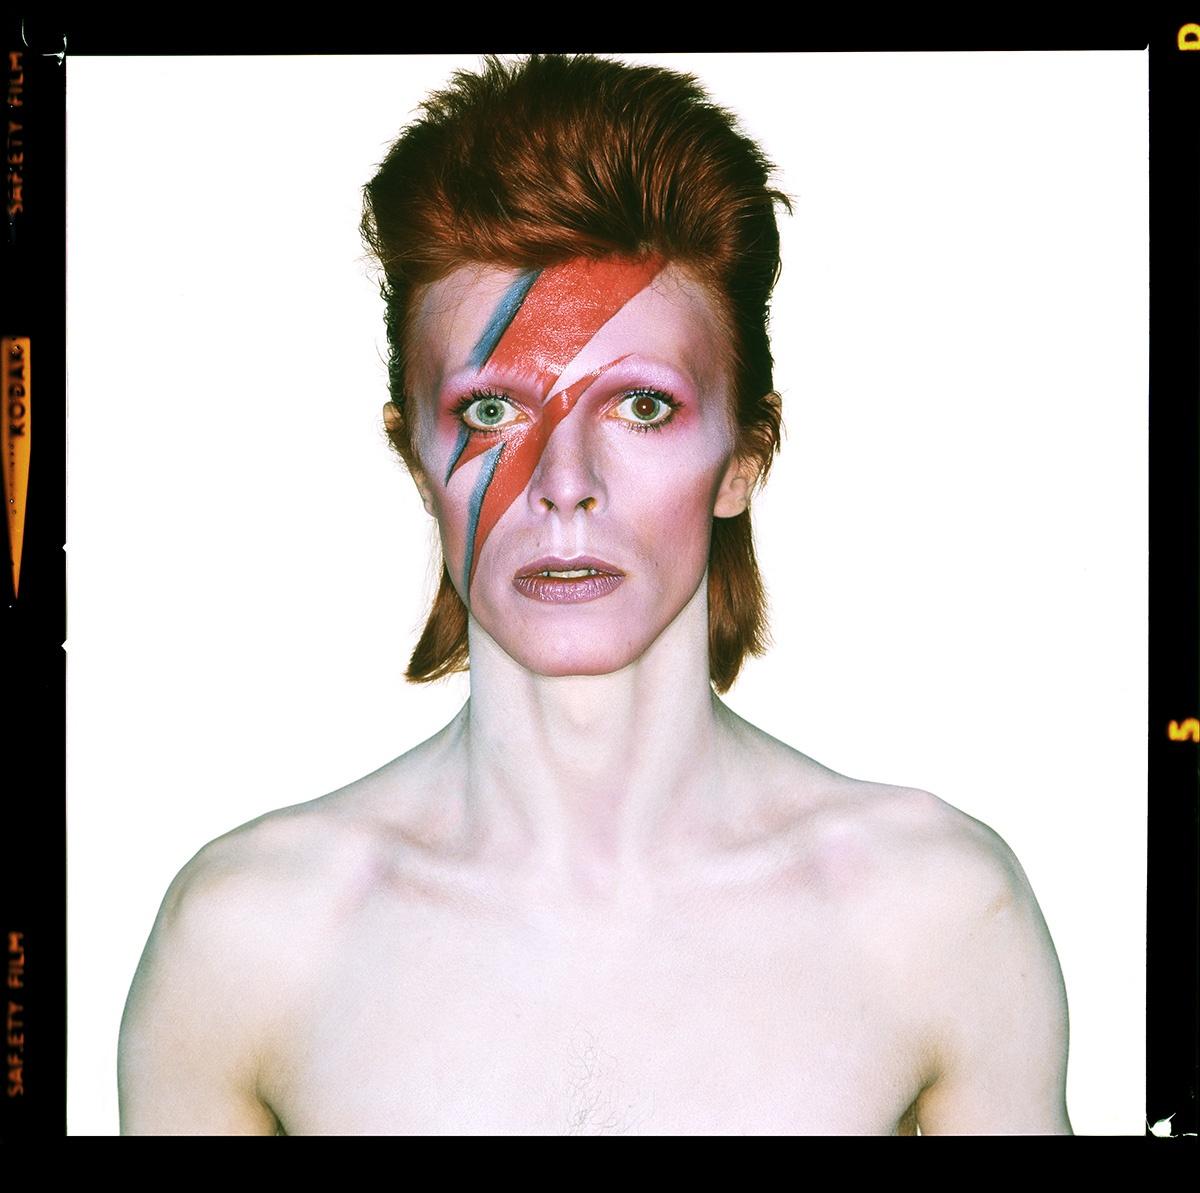 David Bowie as 'Aladdin Sane', 1973 - Brian Duffy (Portrait Photography)
Co-signed by David Bowie and Brian Duffy, from a limited edition of 25 
Archival pigment print
40 x 40 inches
From an edition of 25 (last 2 remaining)

Worldwide shipping